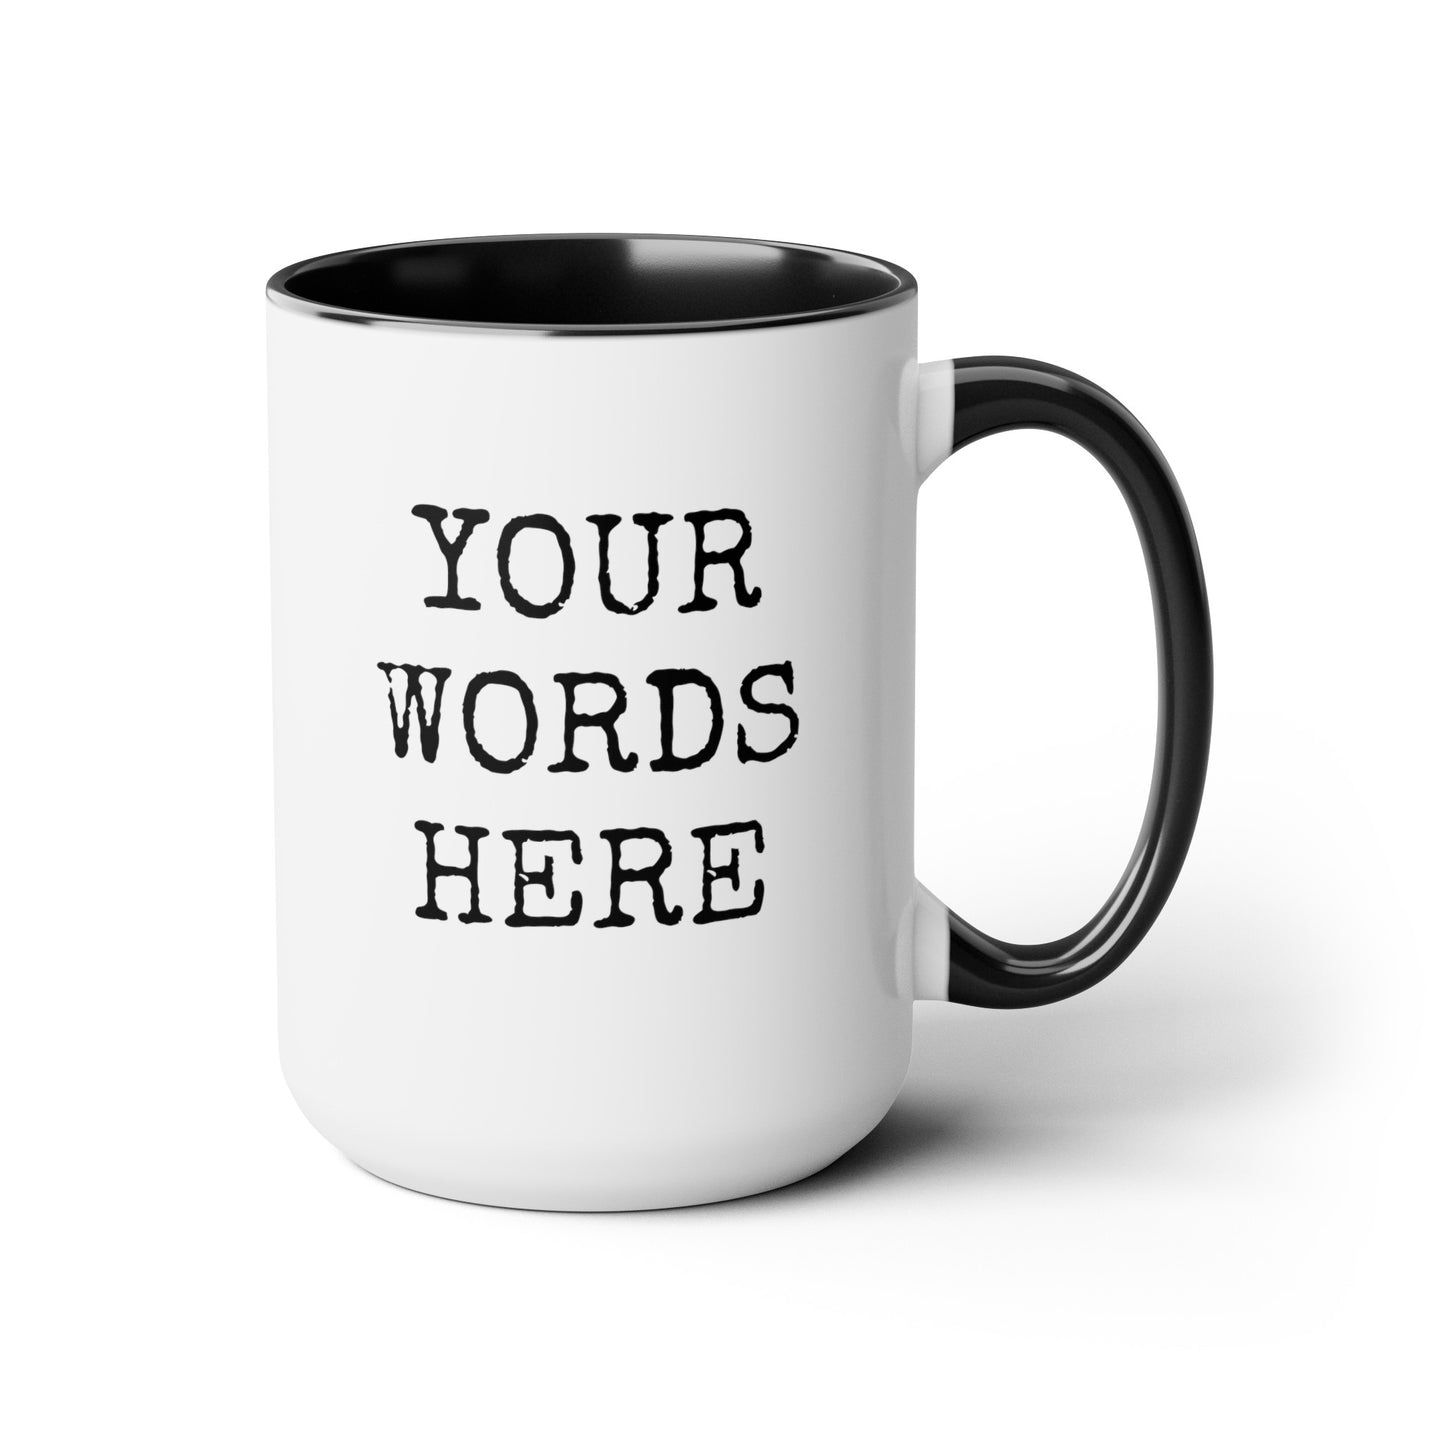 Create Your Own Words Here 15oz white with with black accent large big funny coffee mug tea cup gift for friend family custom customized text personalized font waveywares wavey wares wavywares wavy wares